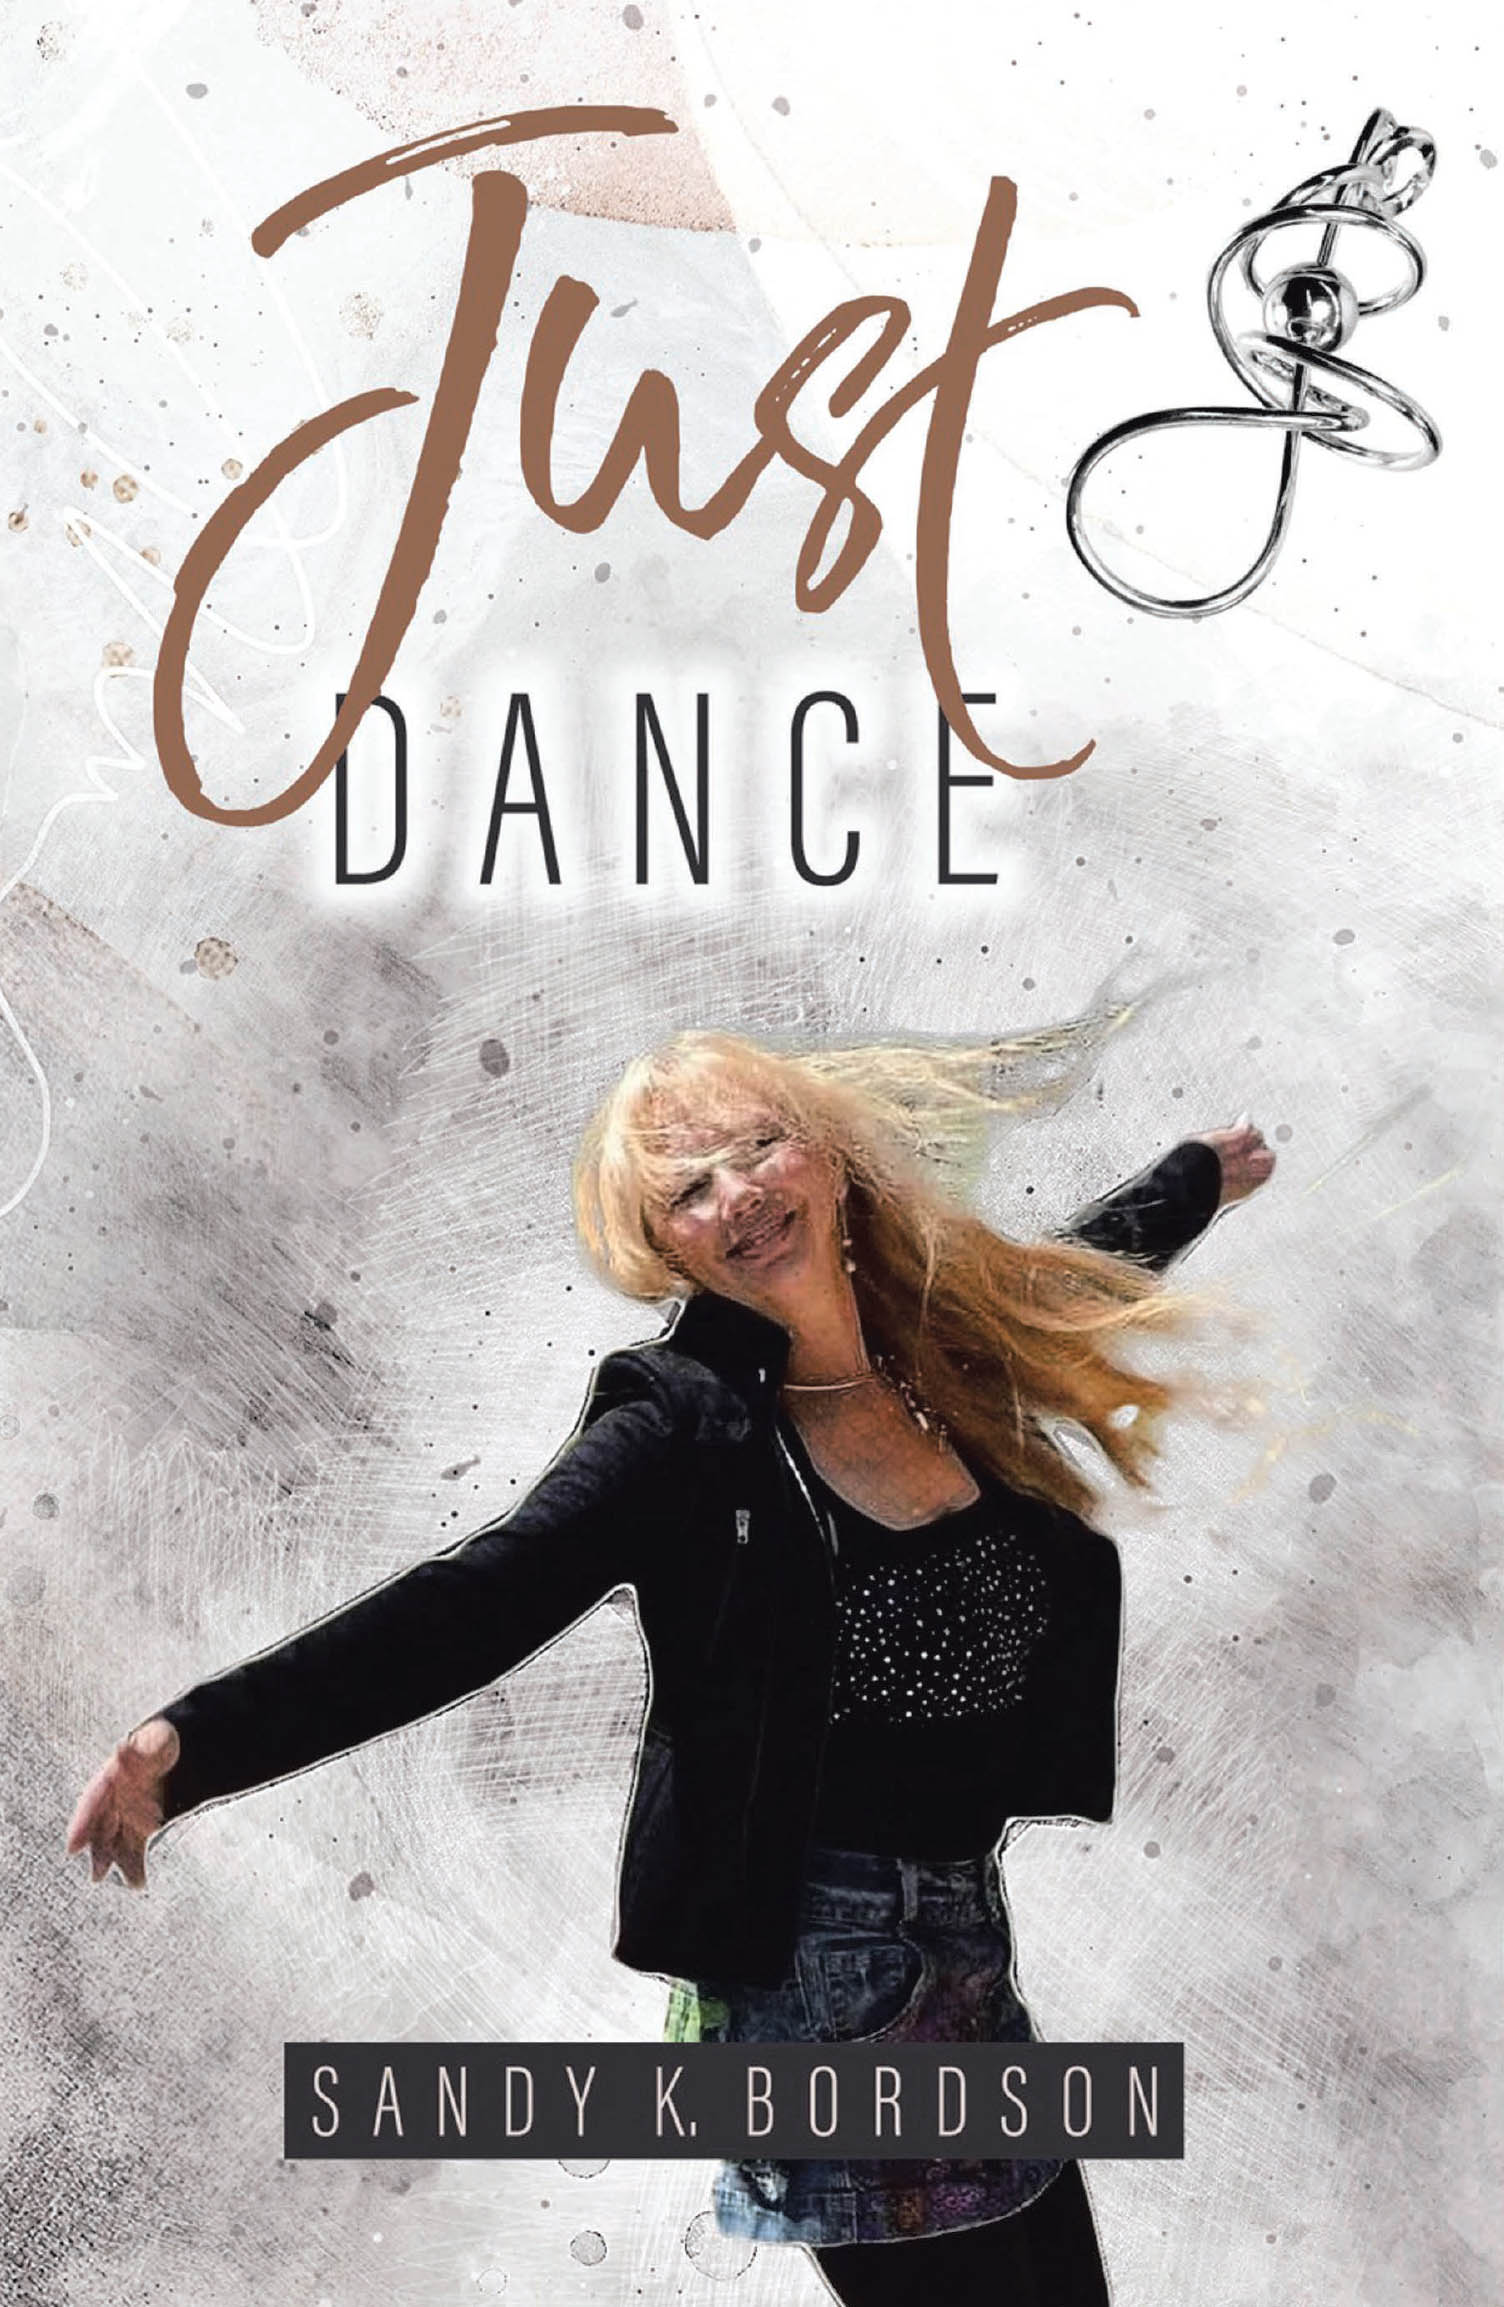 Sandy K. Bordson’s Newly Released "Just Dance" is a Heartfelt Journey of Faith and Healing